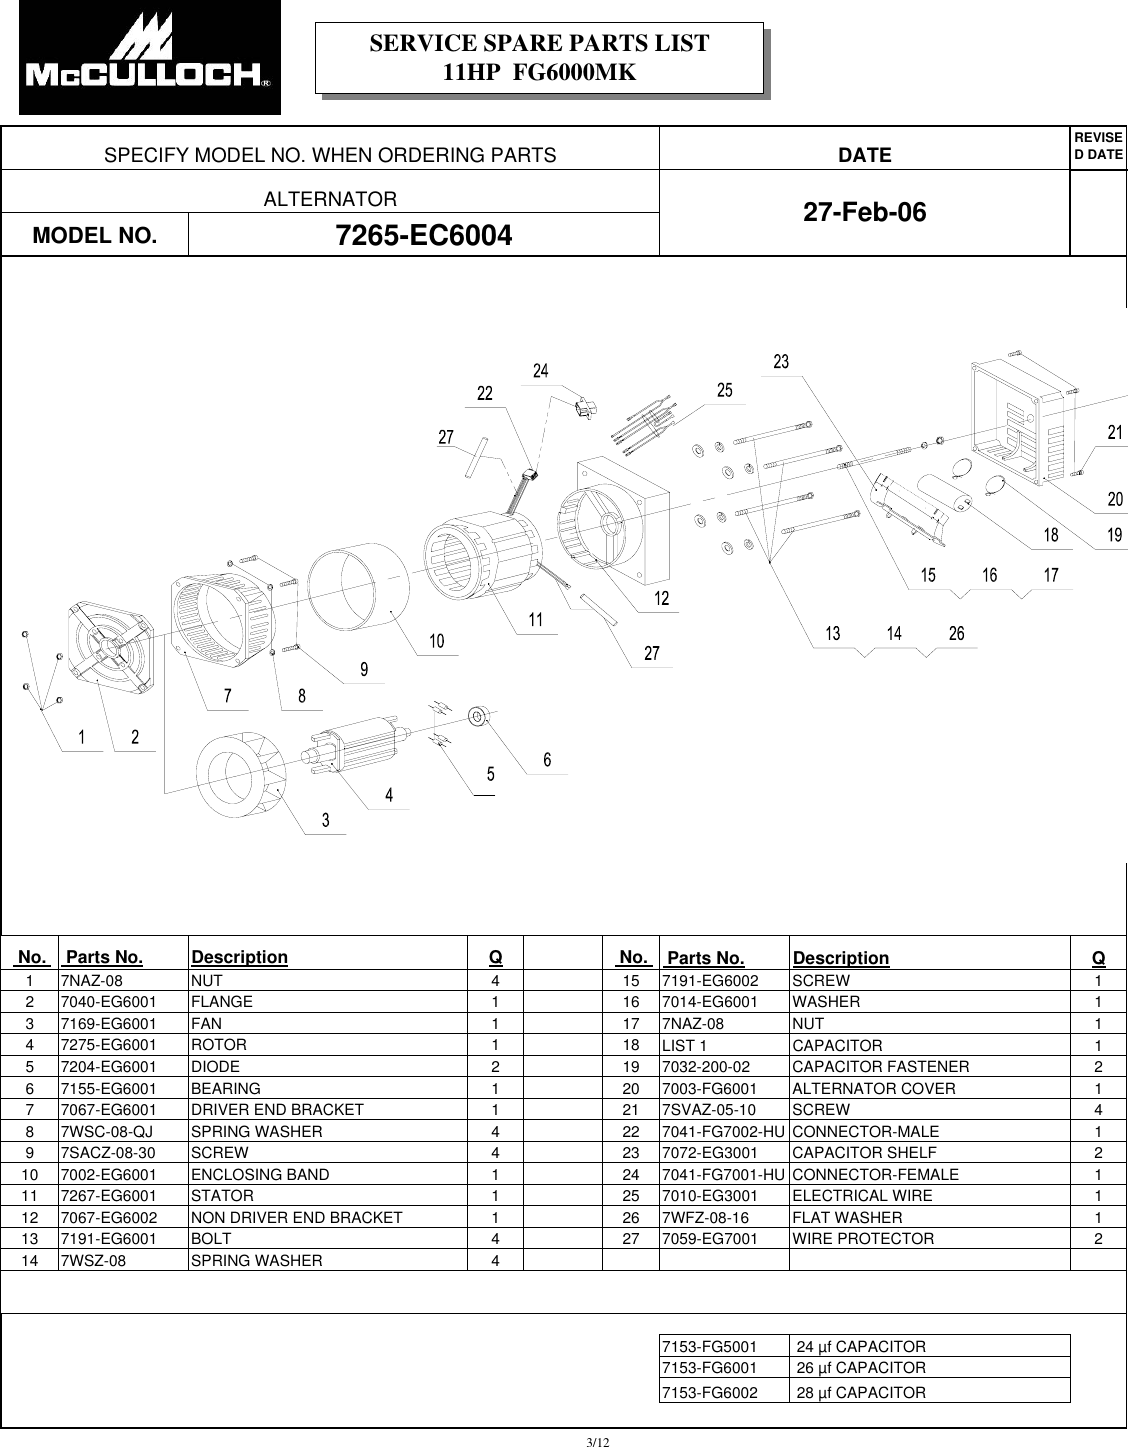 Page 3 of 12 - Mcculloch Mcculloch-Fg6000Mkud-C-Parts-List- IPL, McCulloch, FG6000MK, 2008-06, 7096FG6024, 966991401, US  Mcculloch-fg6000mkud-c-parts-list